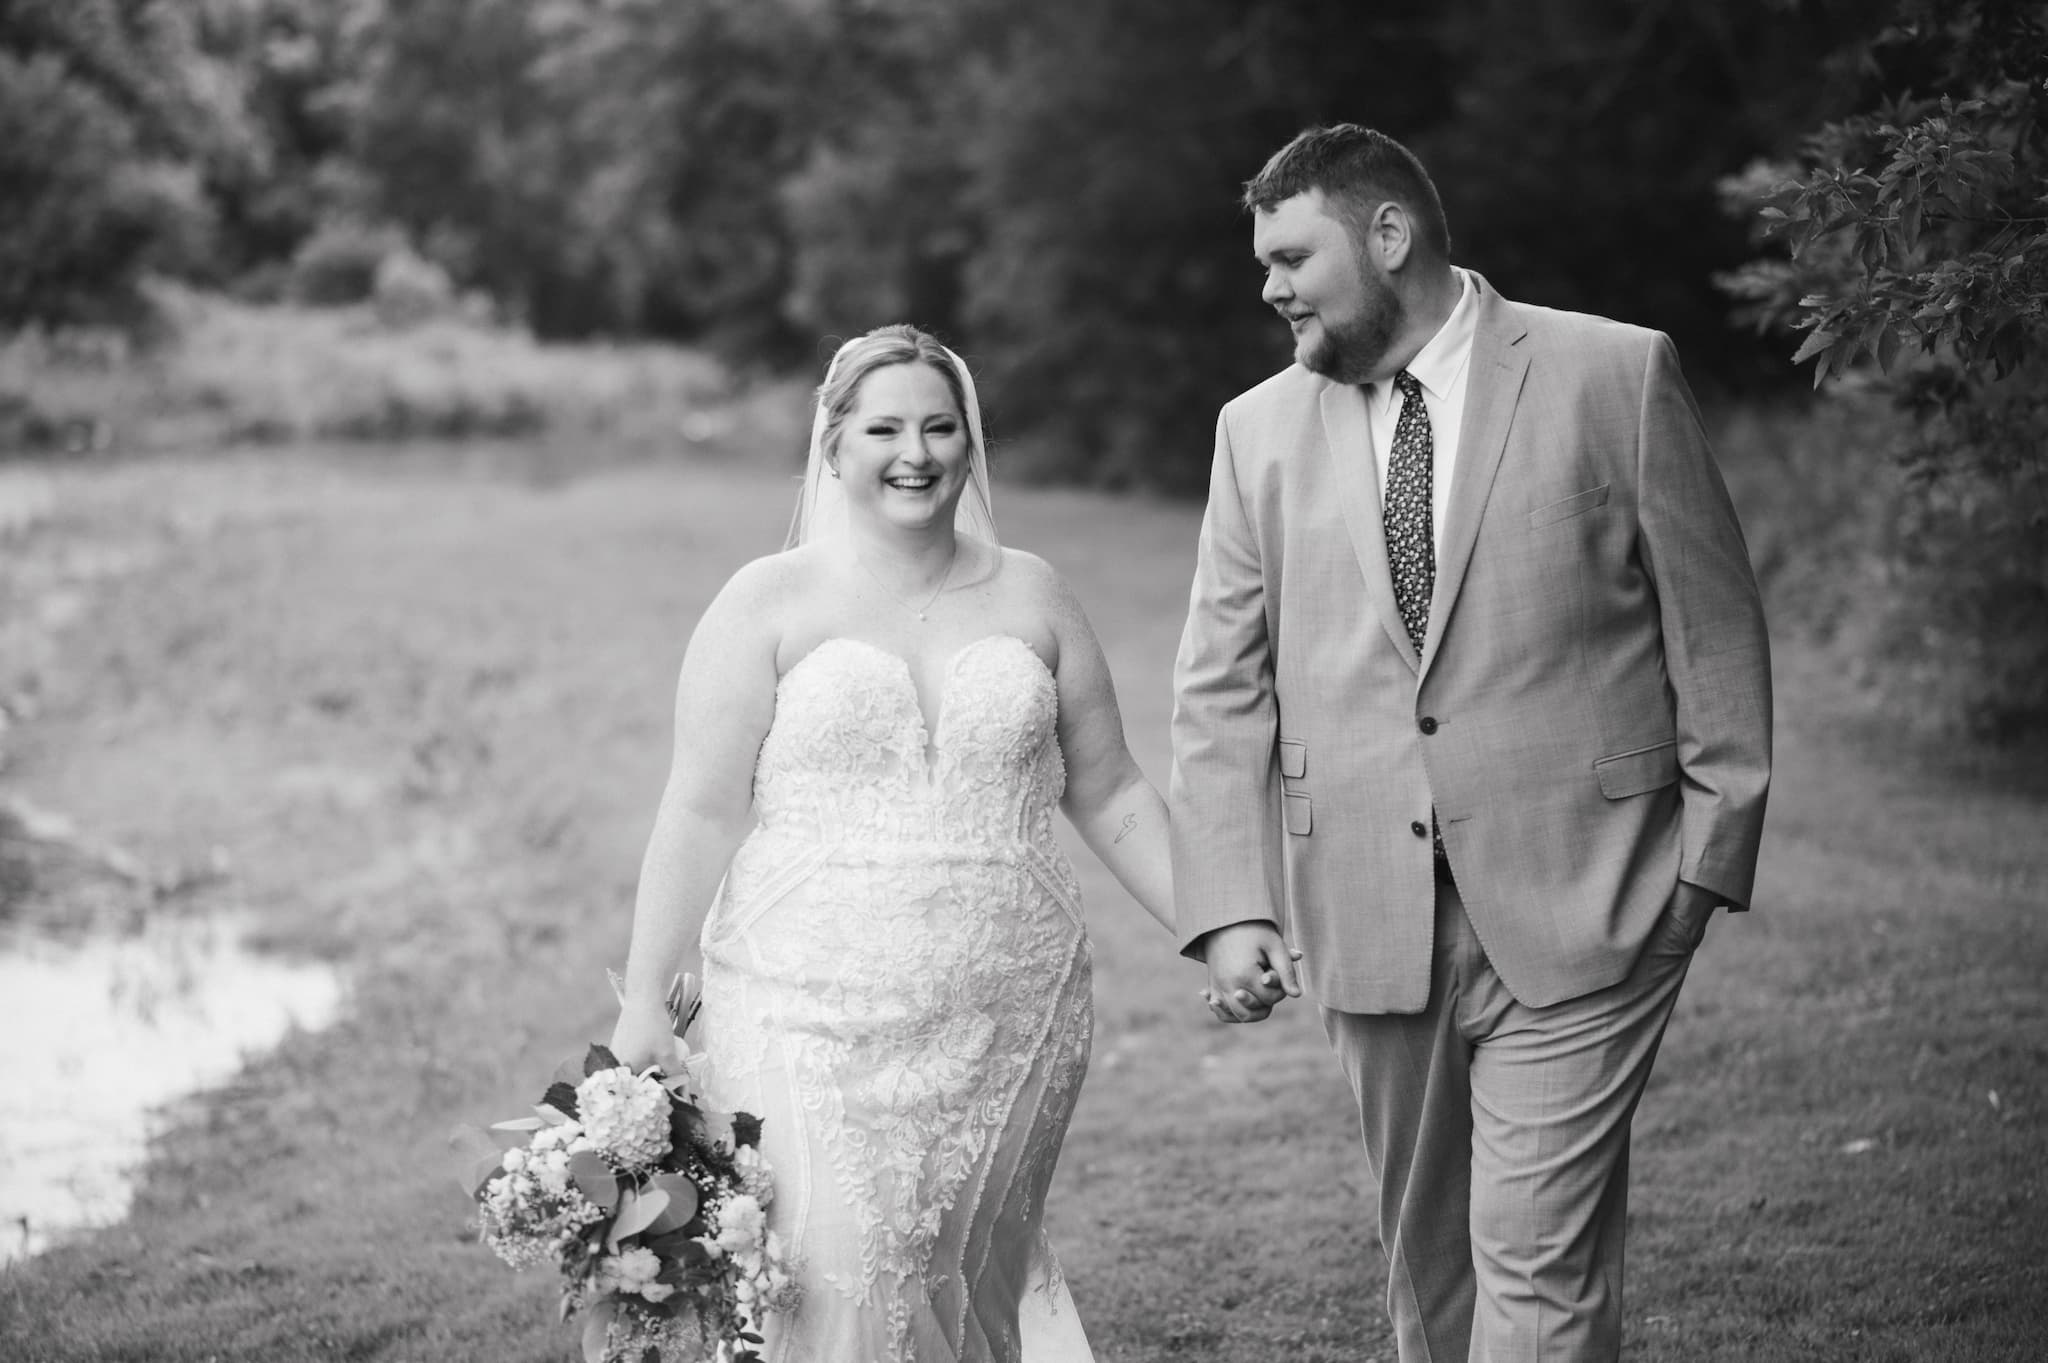 Timber Barn Wedding: Kait and Mike’s Beautiful Summer Wedding in St Jacob's